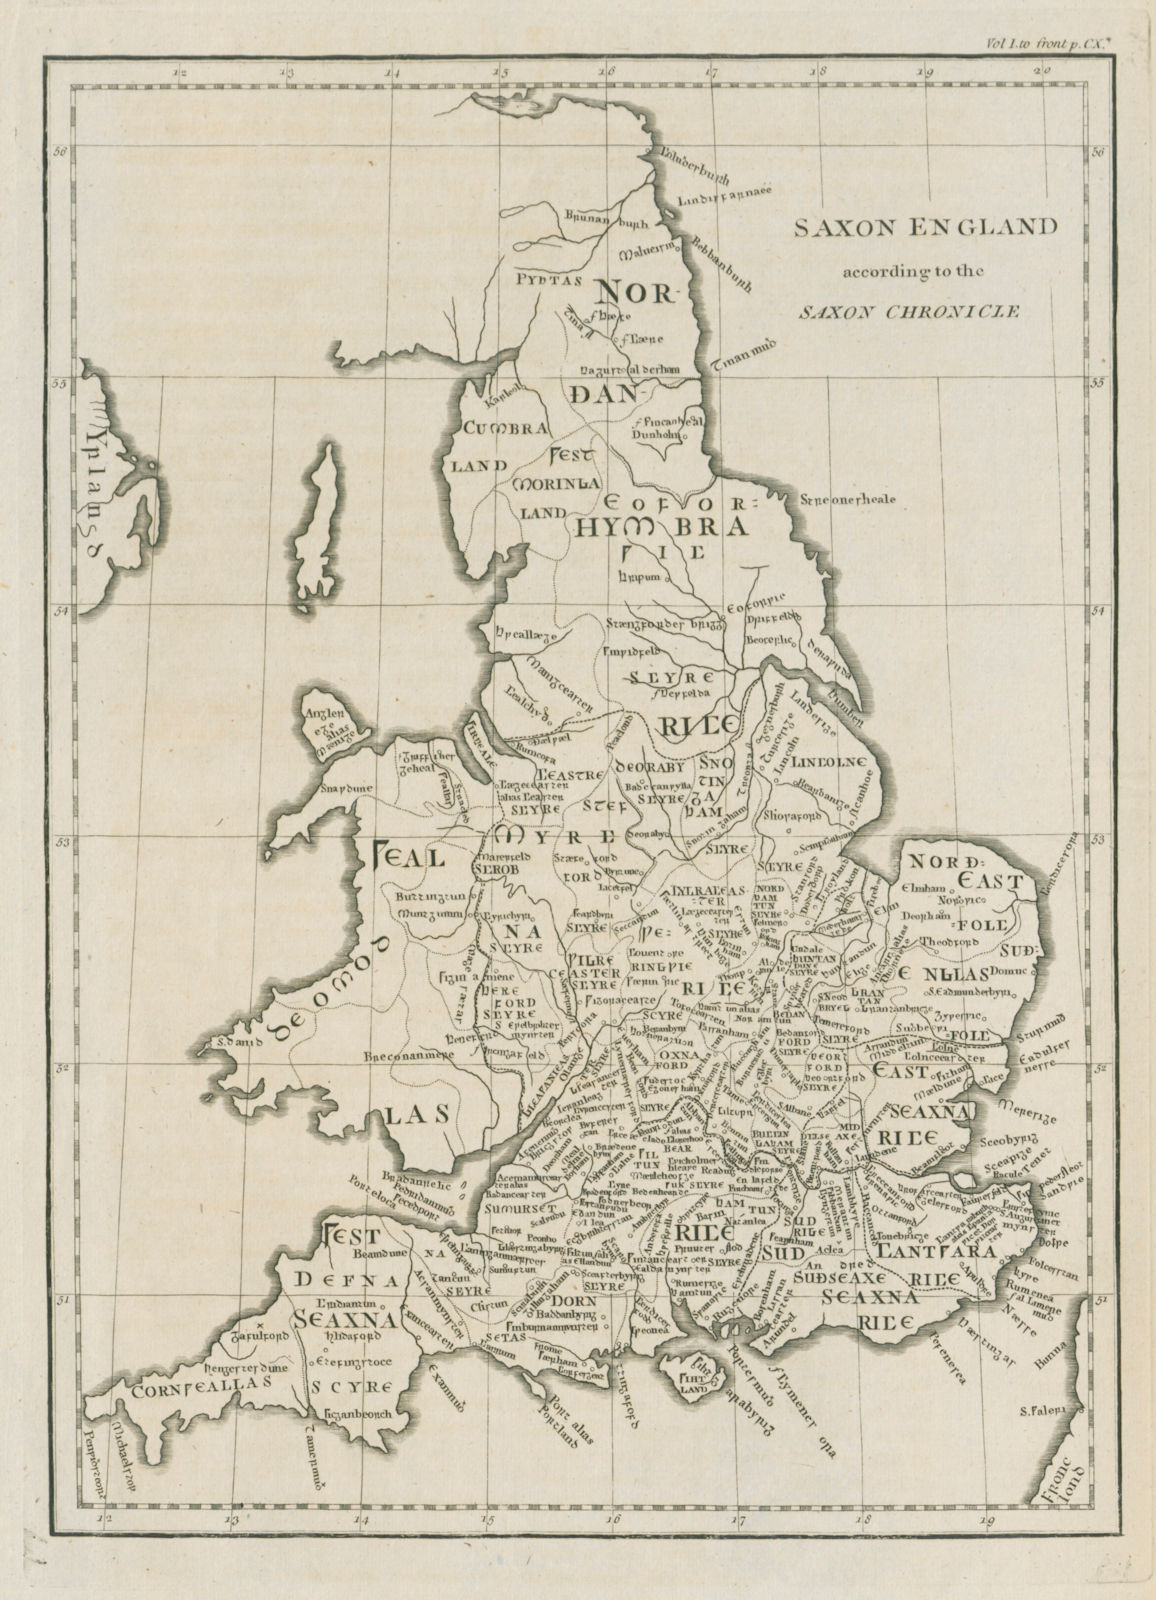 "Saxon England according to the Saxon Chronicle", by John CARY 1789 old map